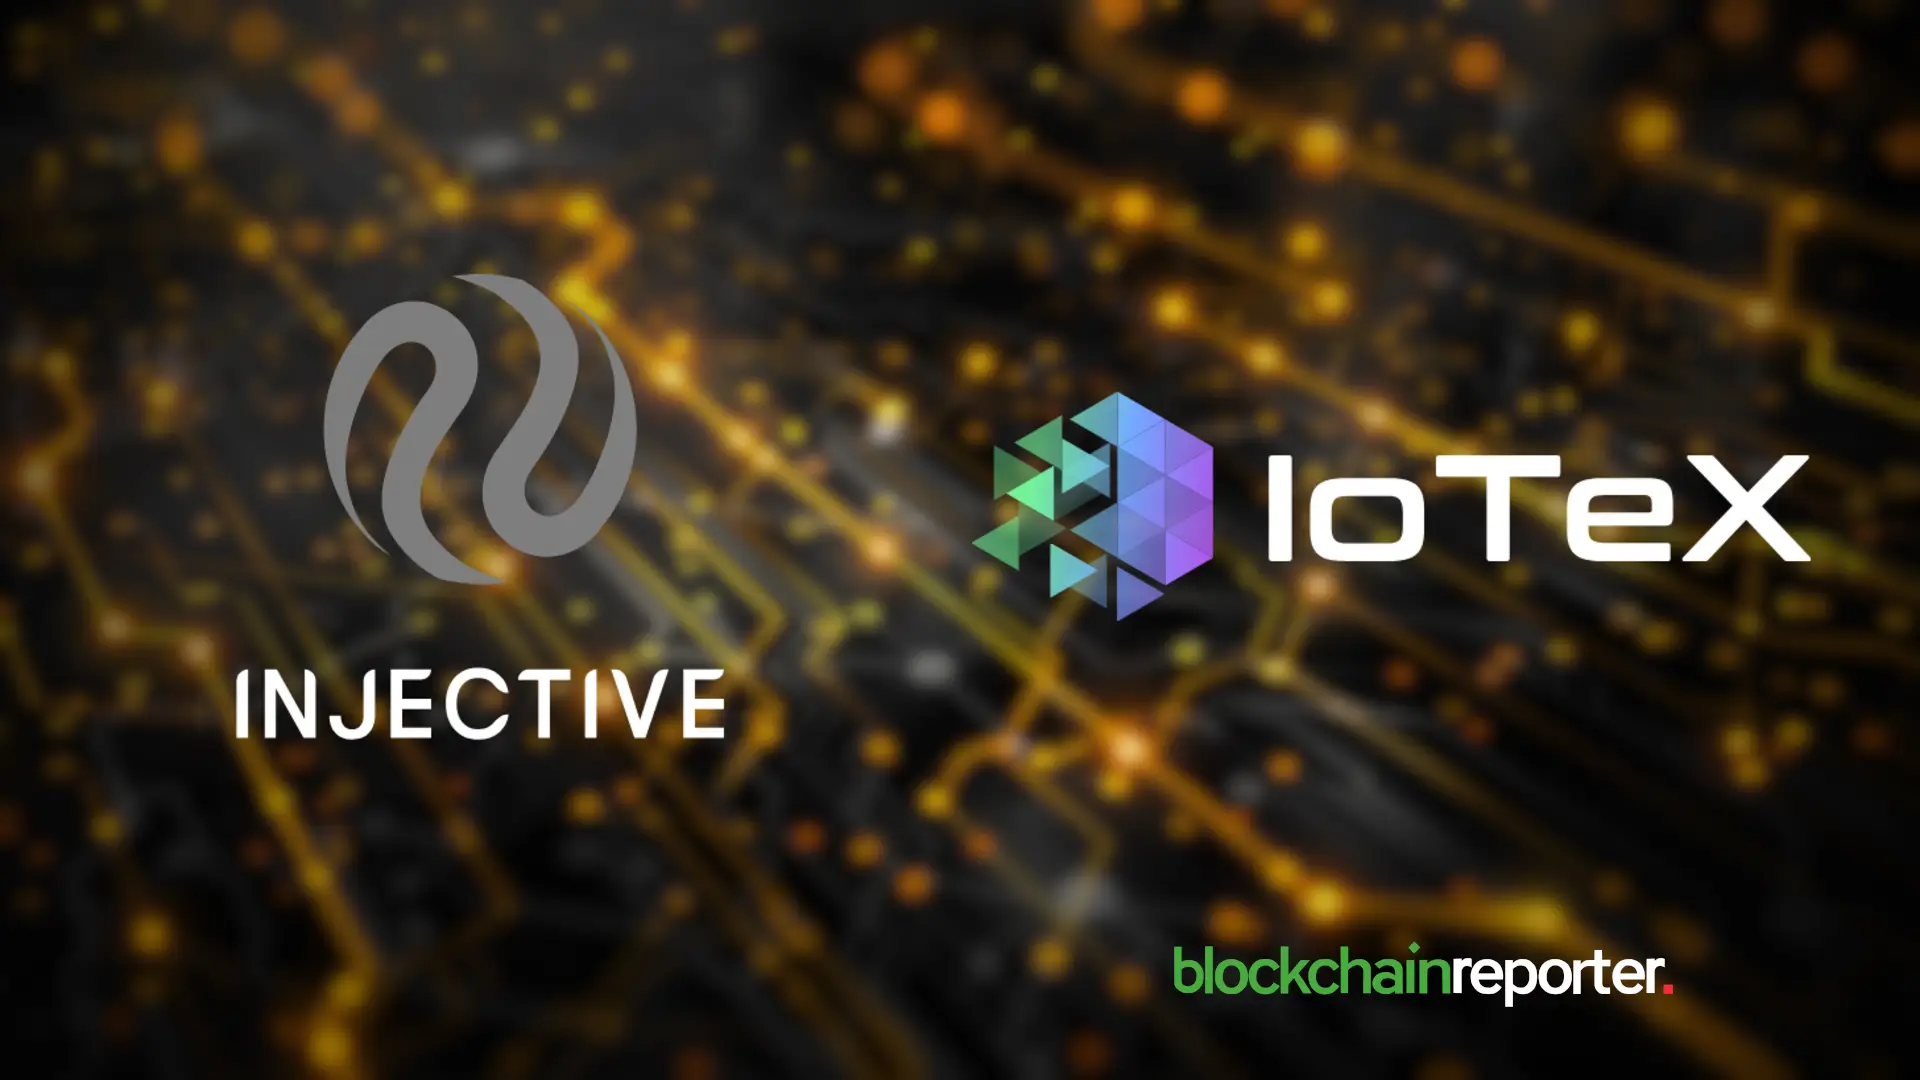 Injective Announces the Integration of IoTeX to Offer Seamless Asset Transfer